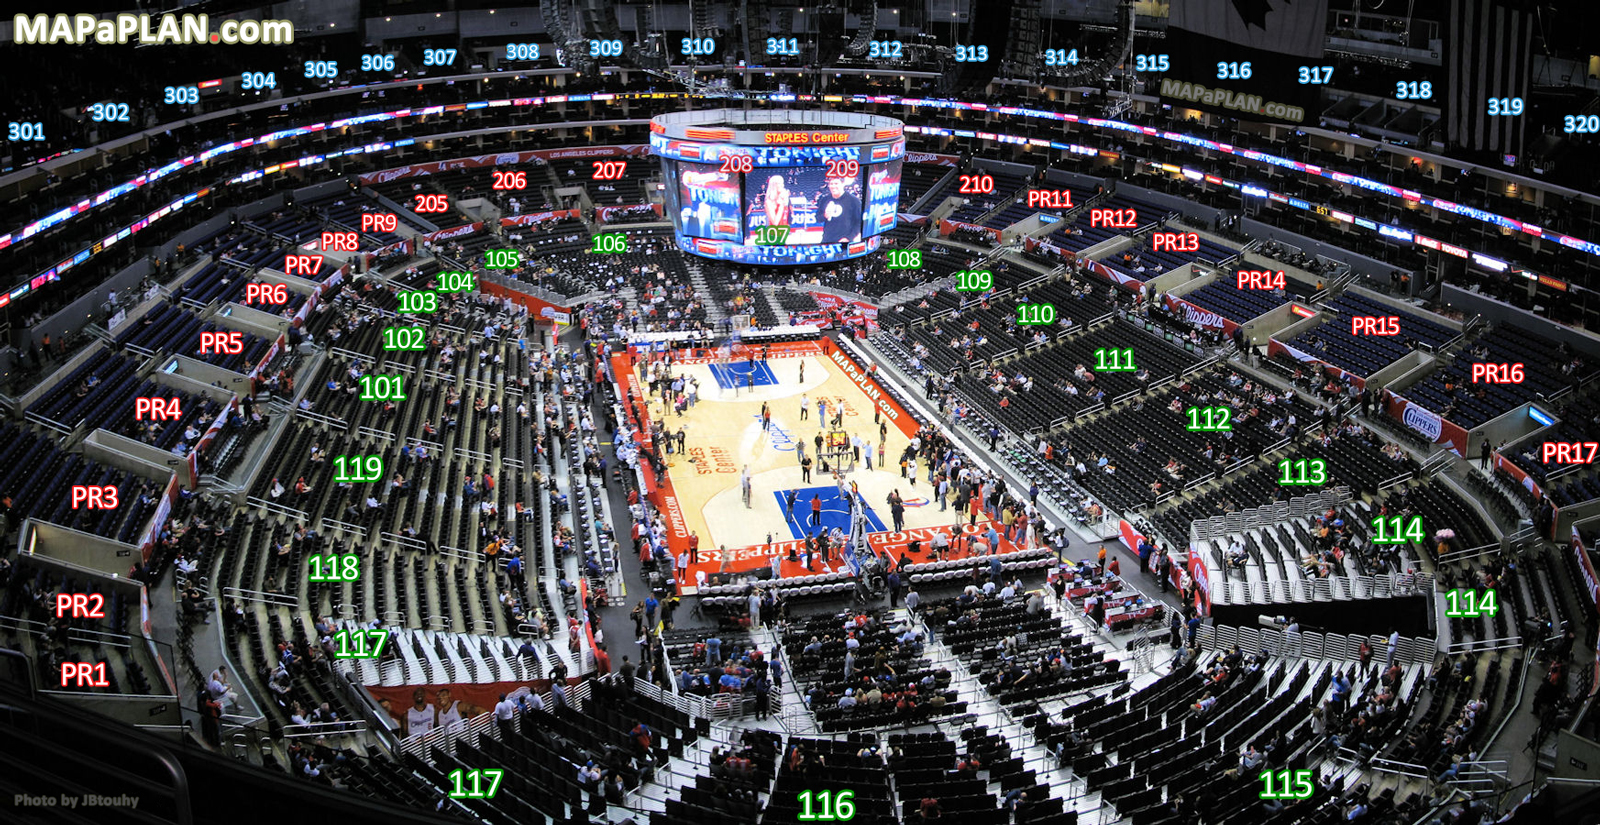 Staples Lakers Seating Chart